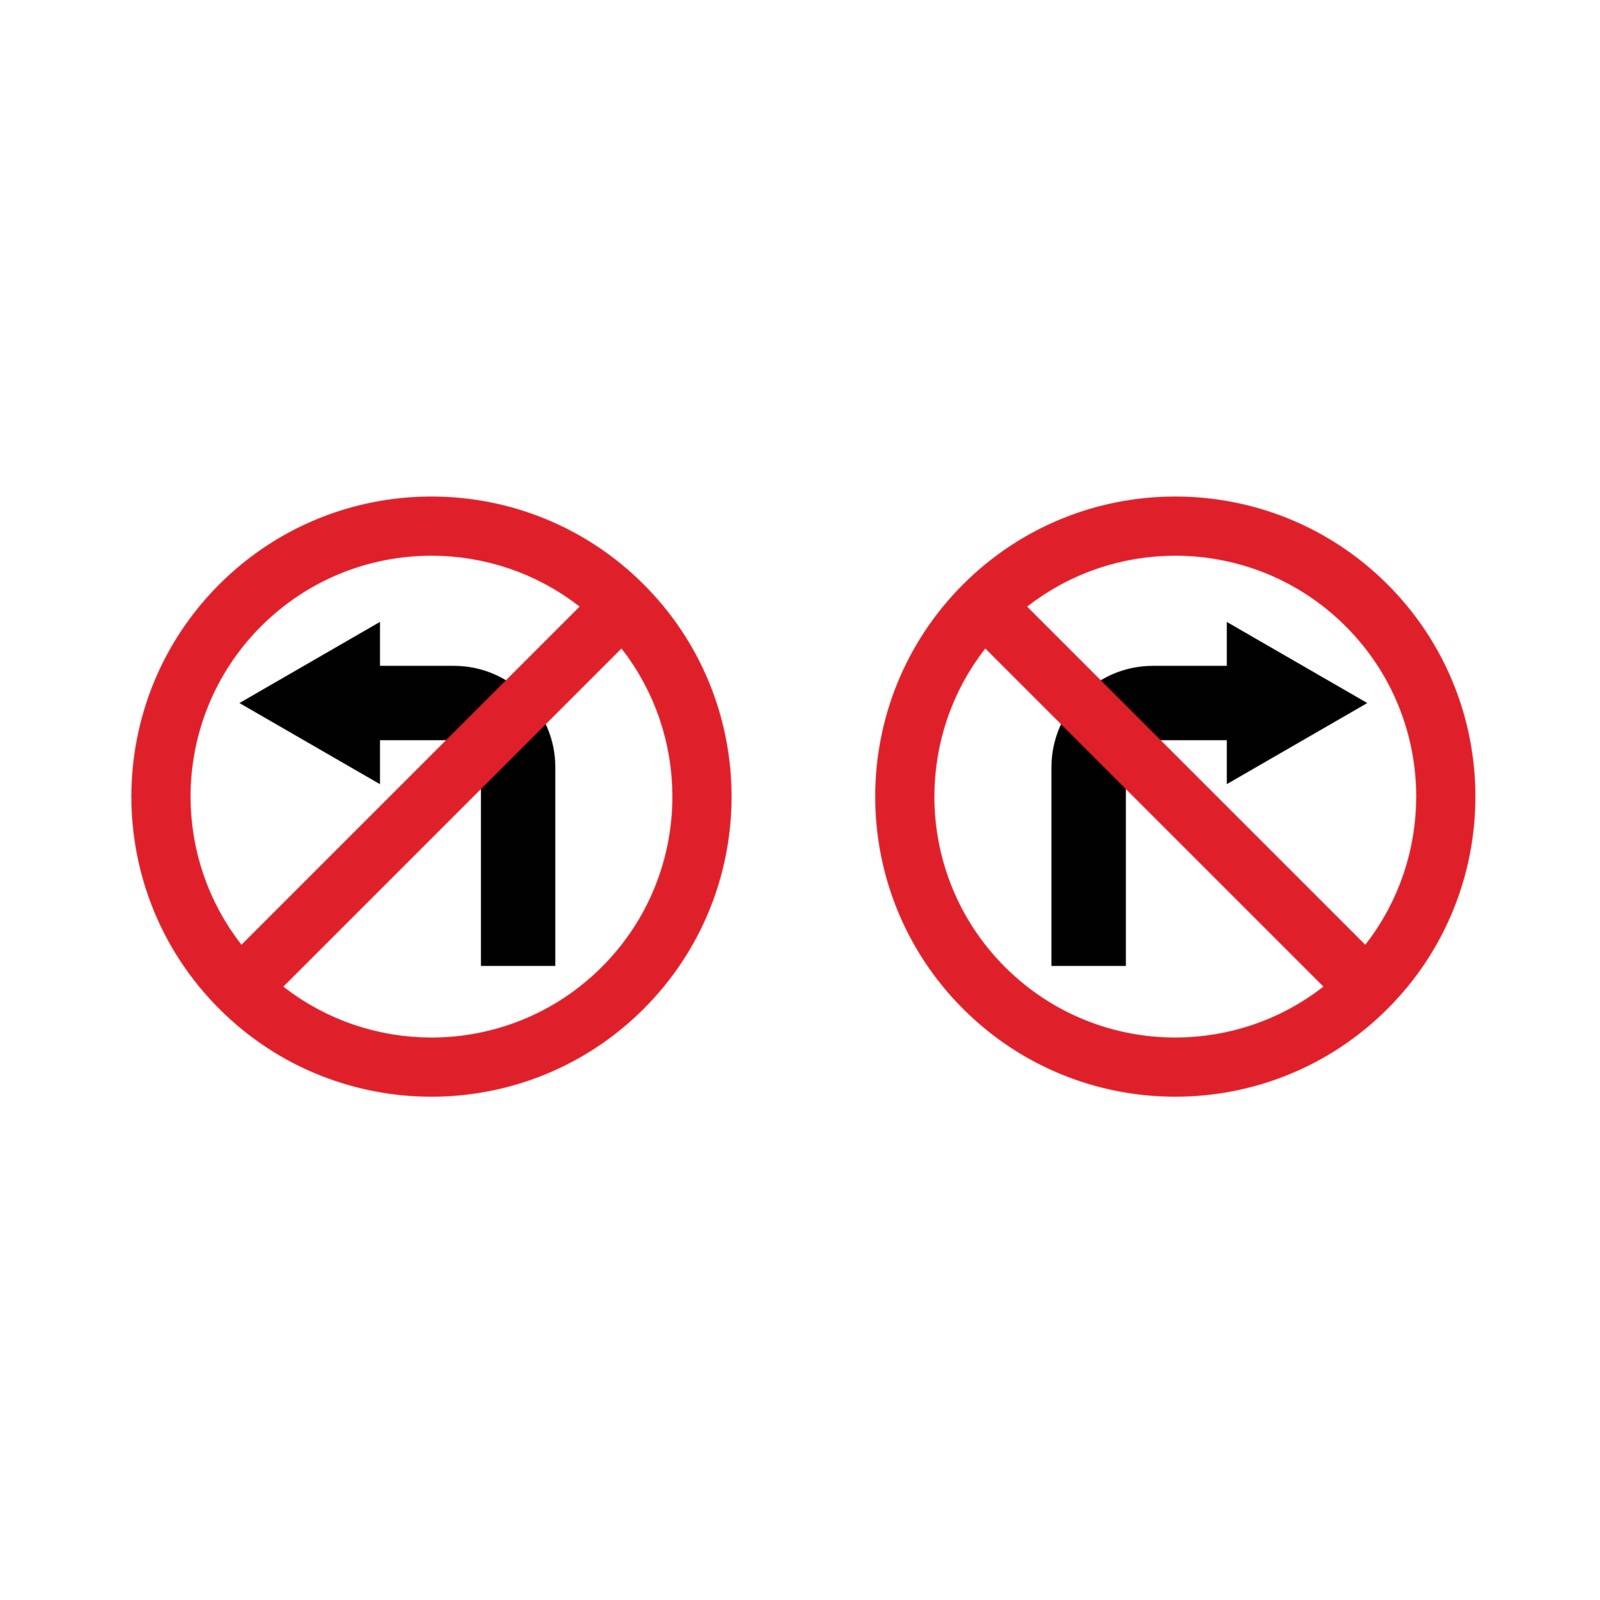 No Turn Left or No Turn Right Sign Illustration Design. Vector EPS 10. by soponyono